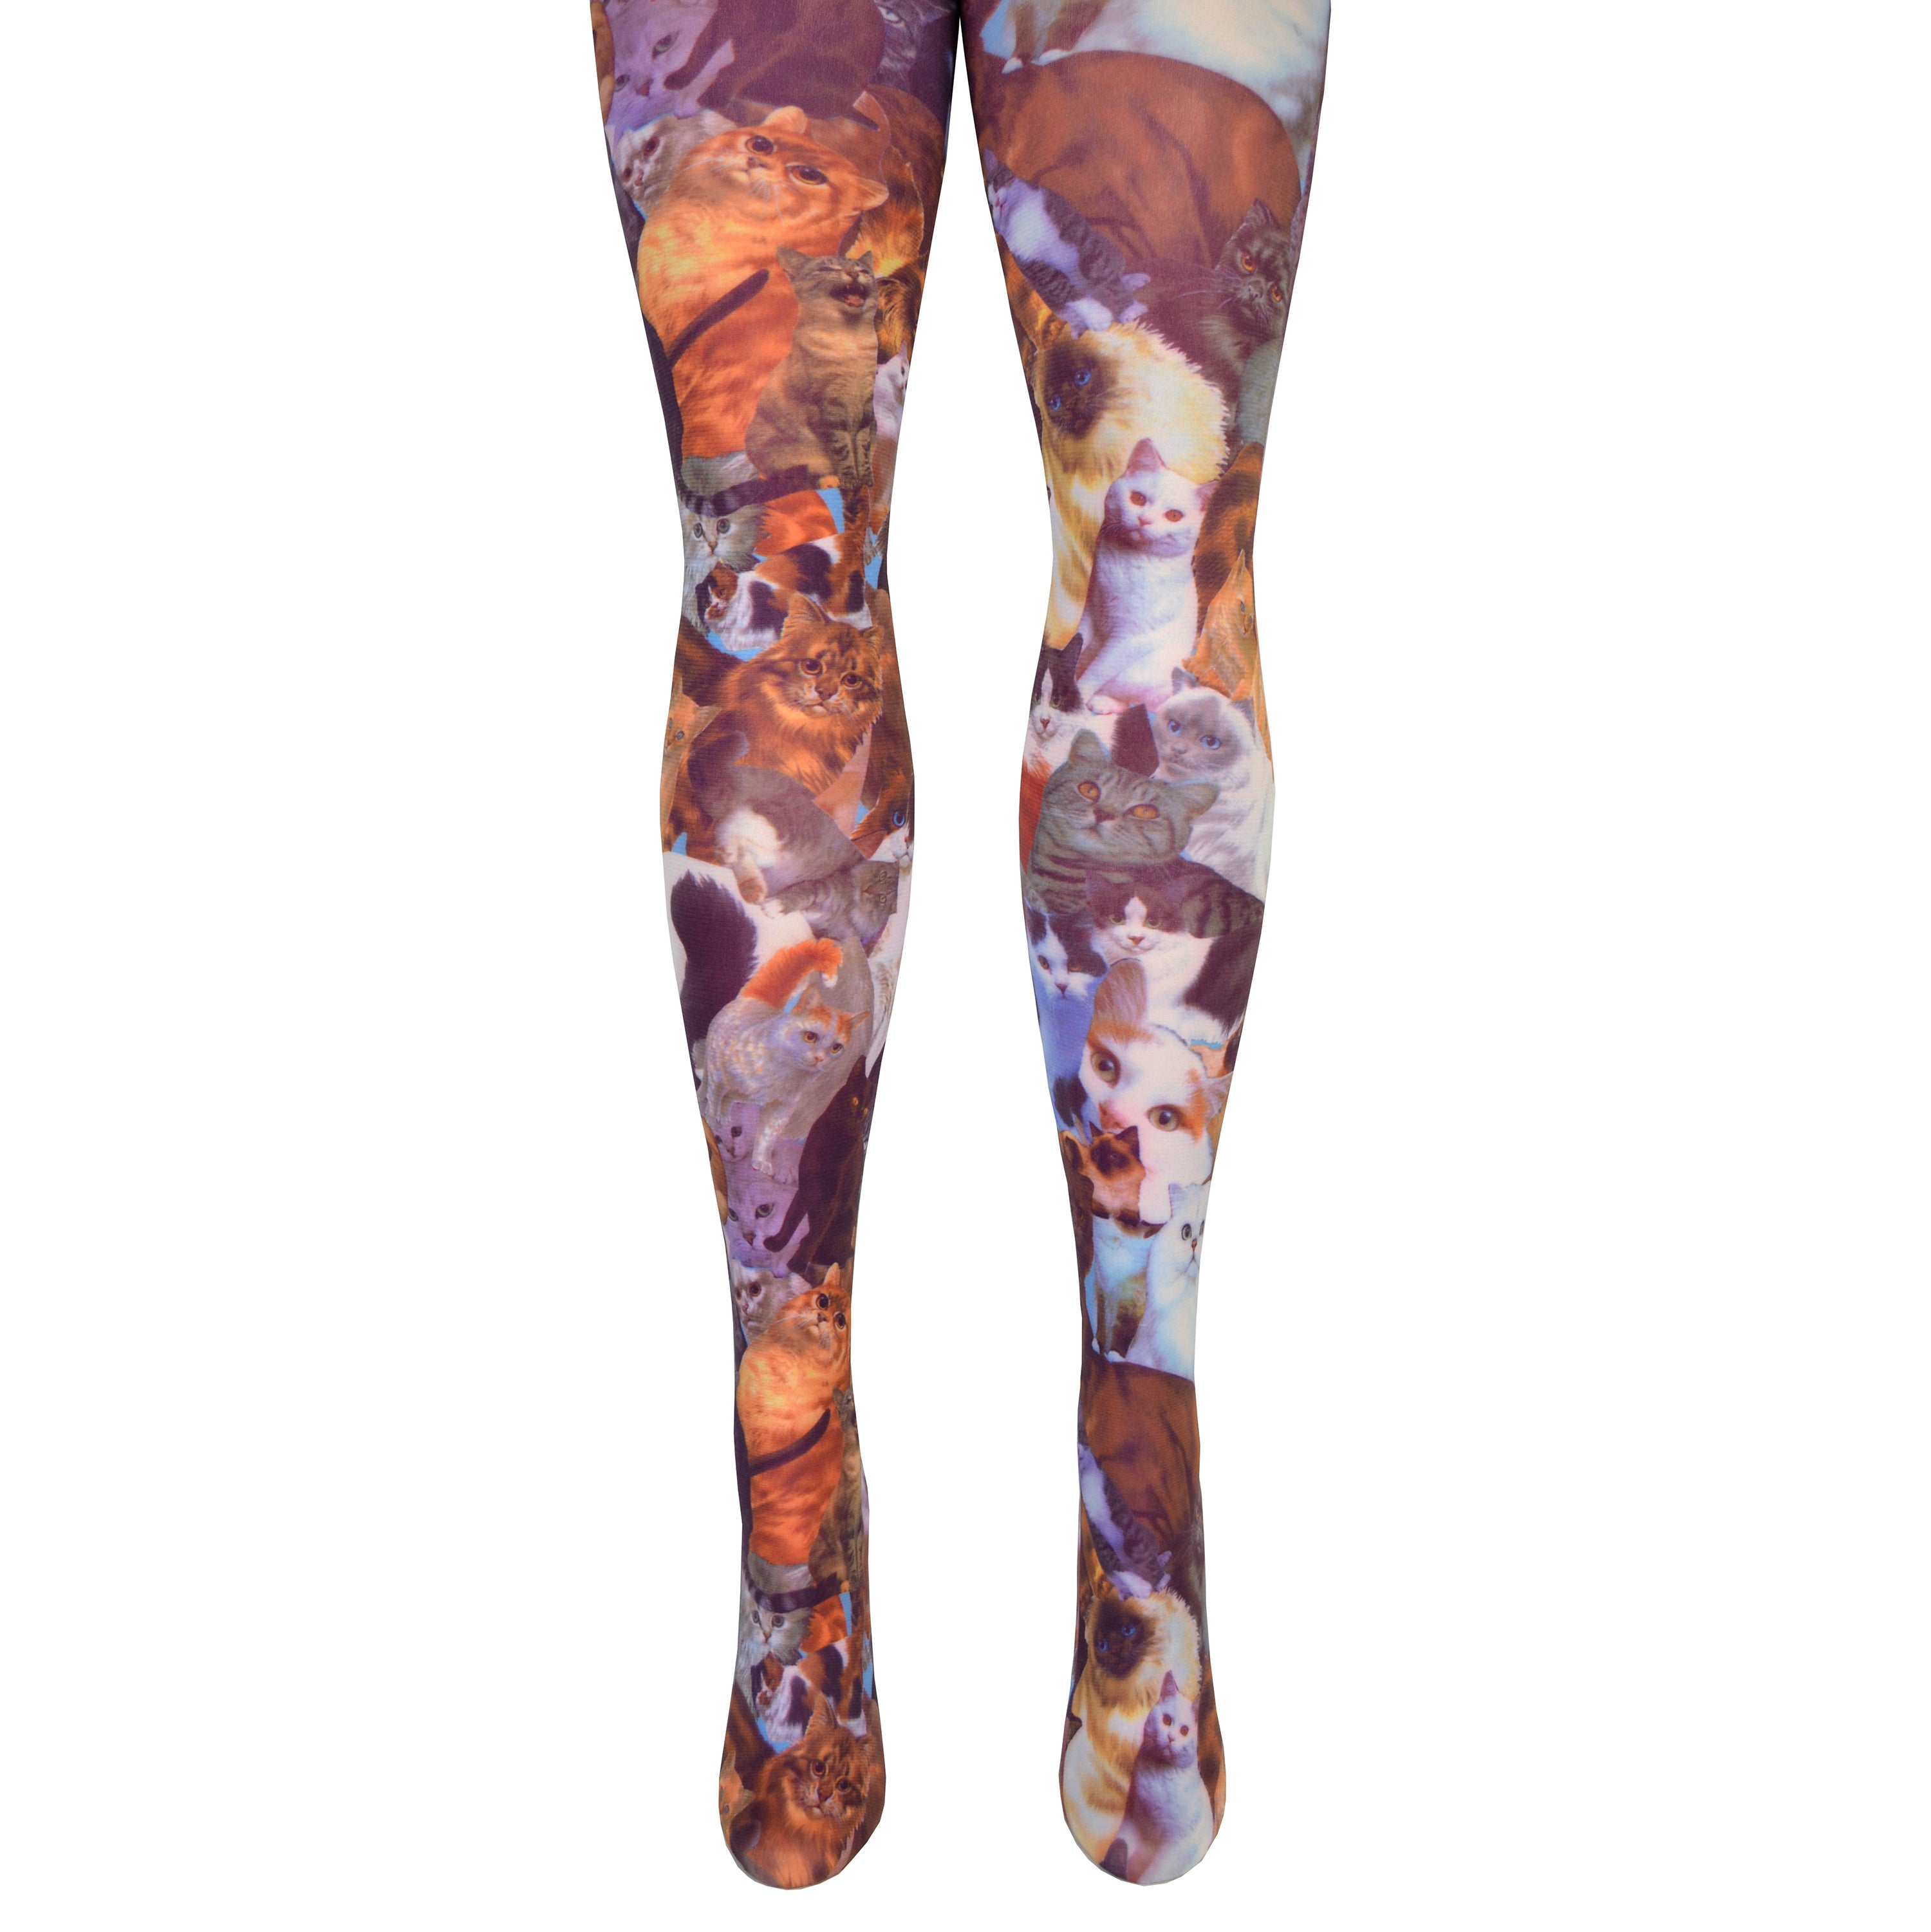 Shown on leg forms, a pair of cat tights that has an all over collage of realistic cats printed on the tights. 